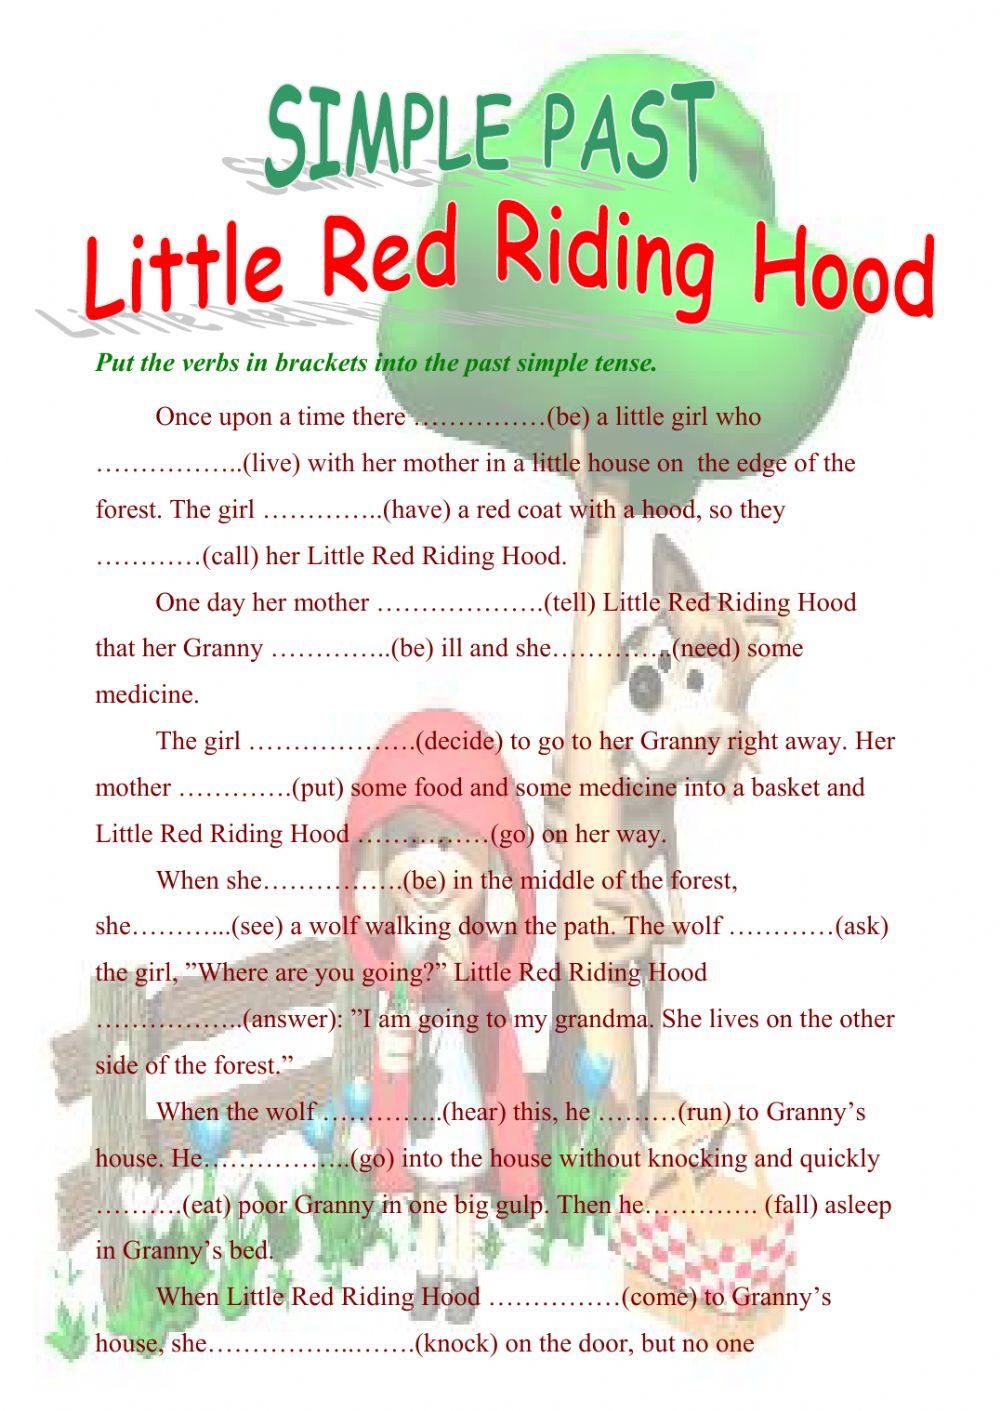 Little Red Riding Hood - Past Simple